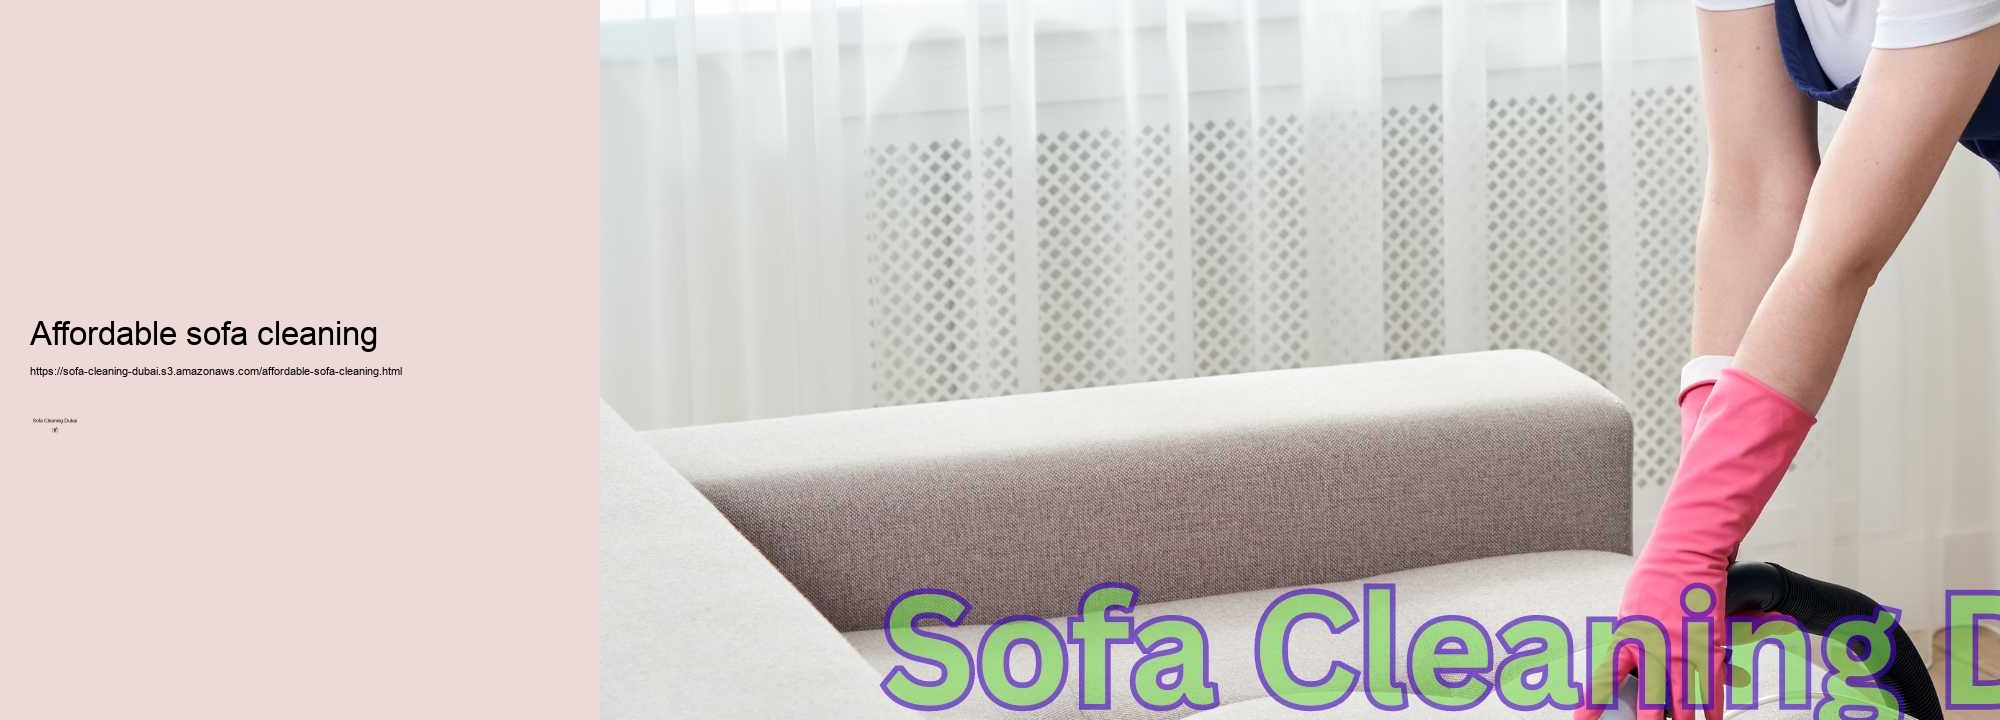 Affordable sofa cleaning